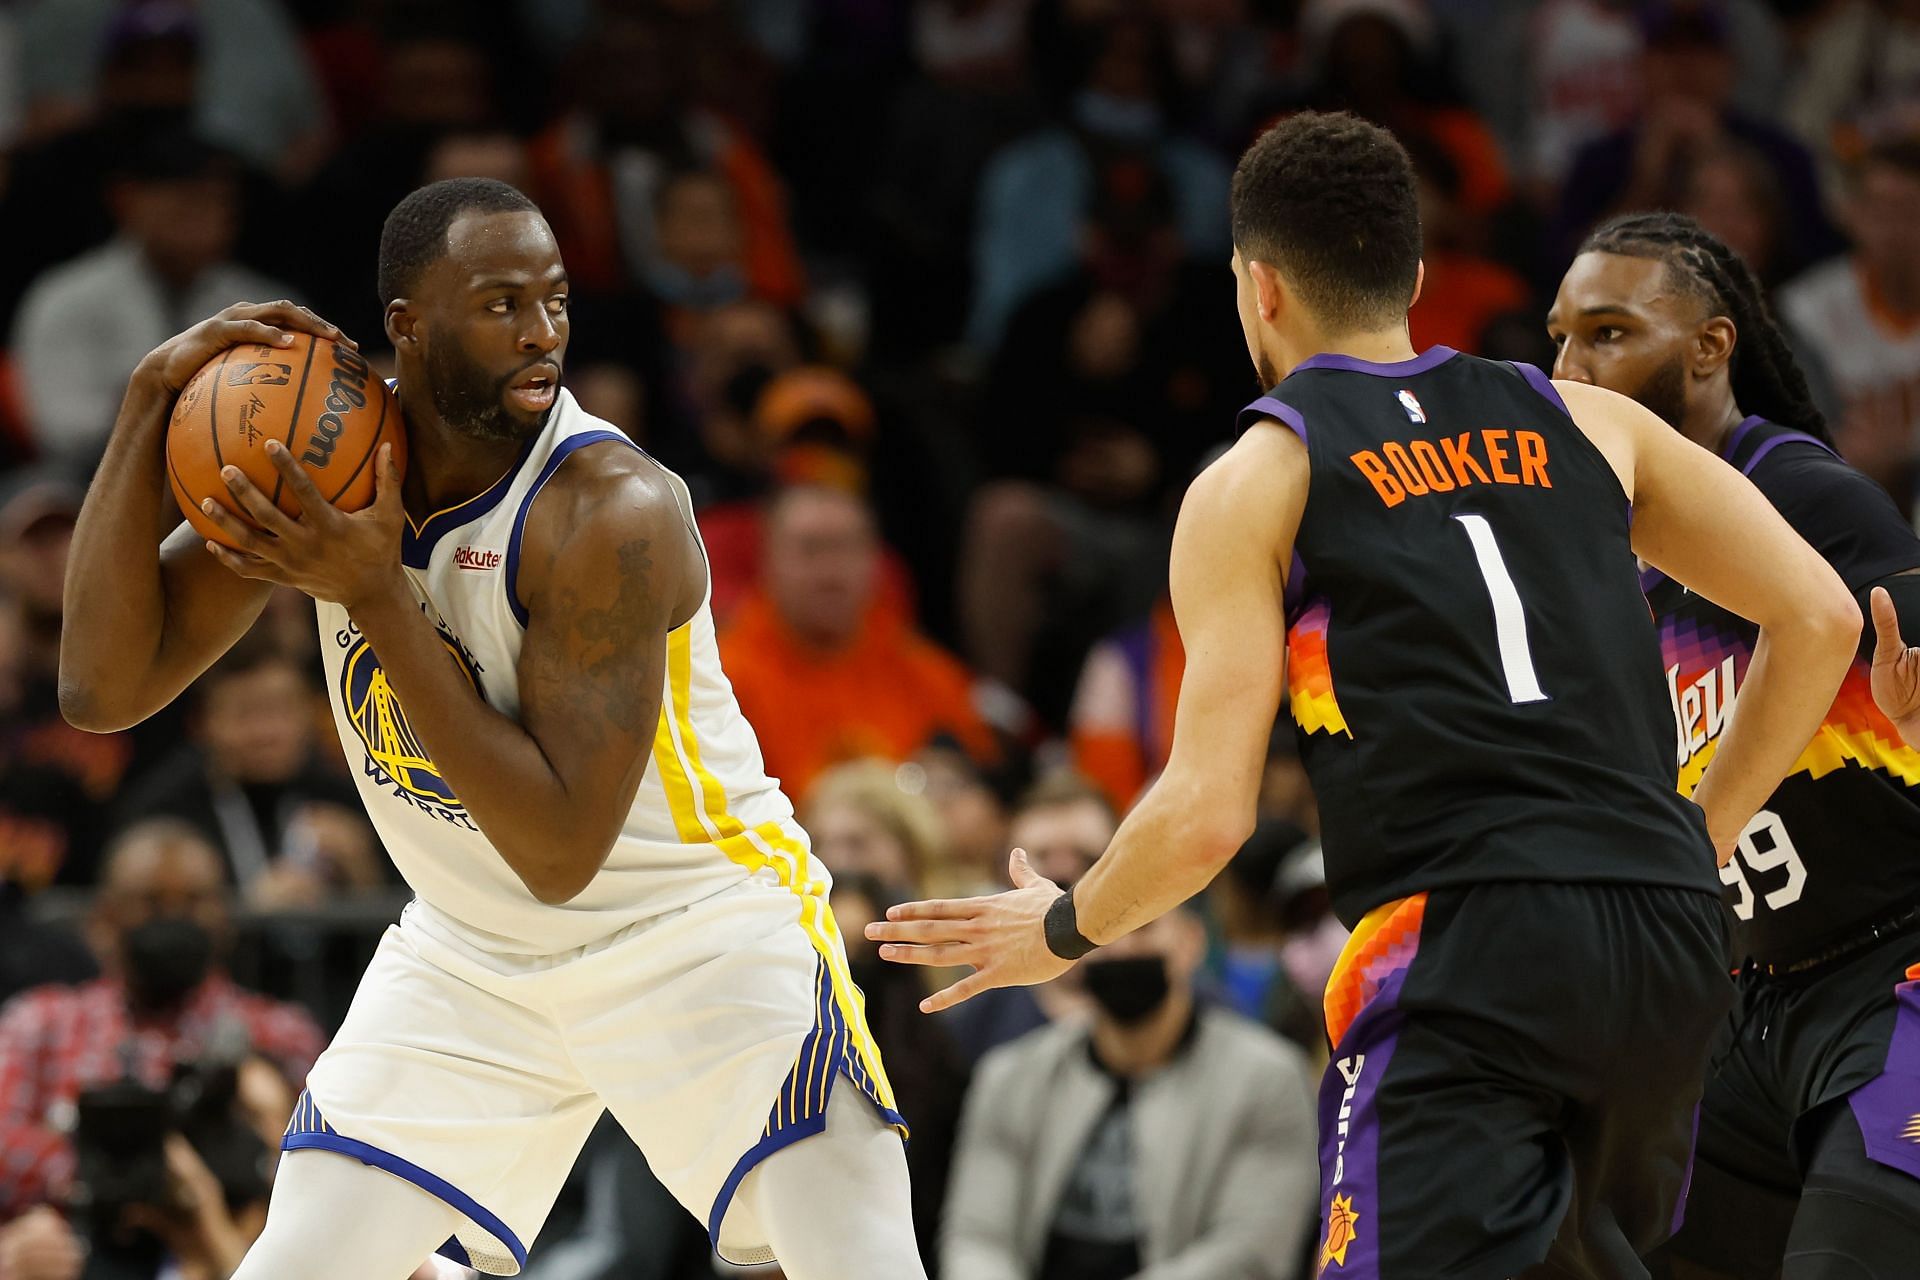 Draymond Green of the Golden State Warriors handles the ball against Devin Booker of the Phoenix Suns on December 25 in Phoenix, Arizona.